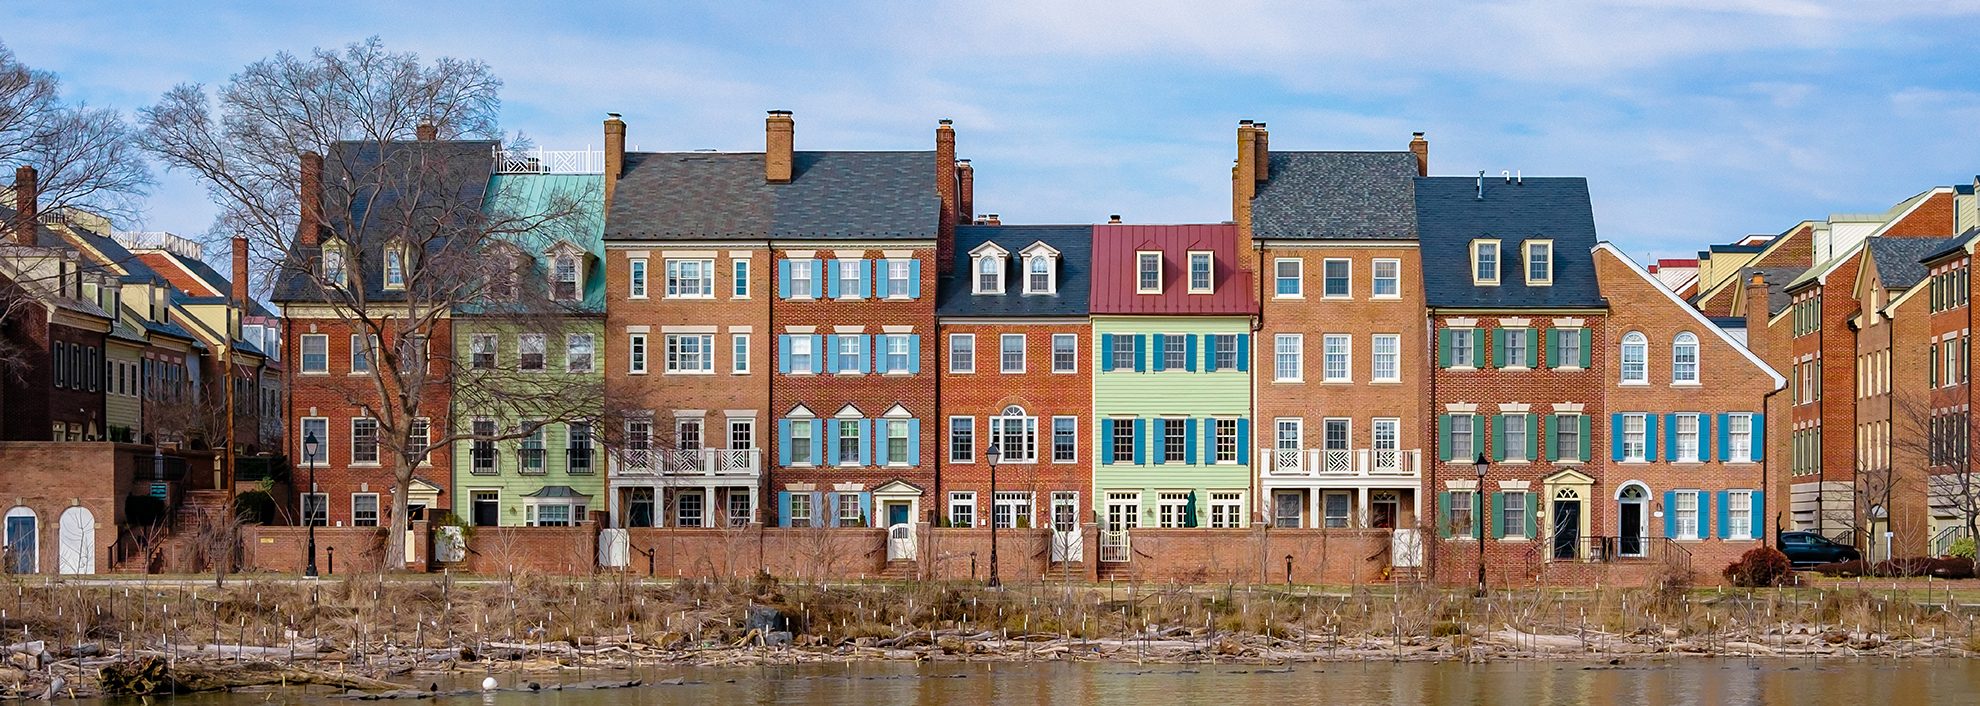 Row of brick townhouses in Old Town Alexandria, Virginia